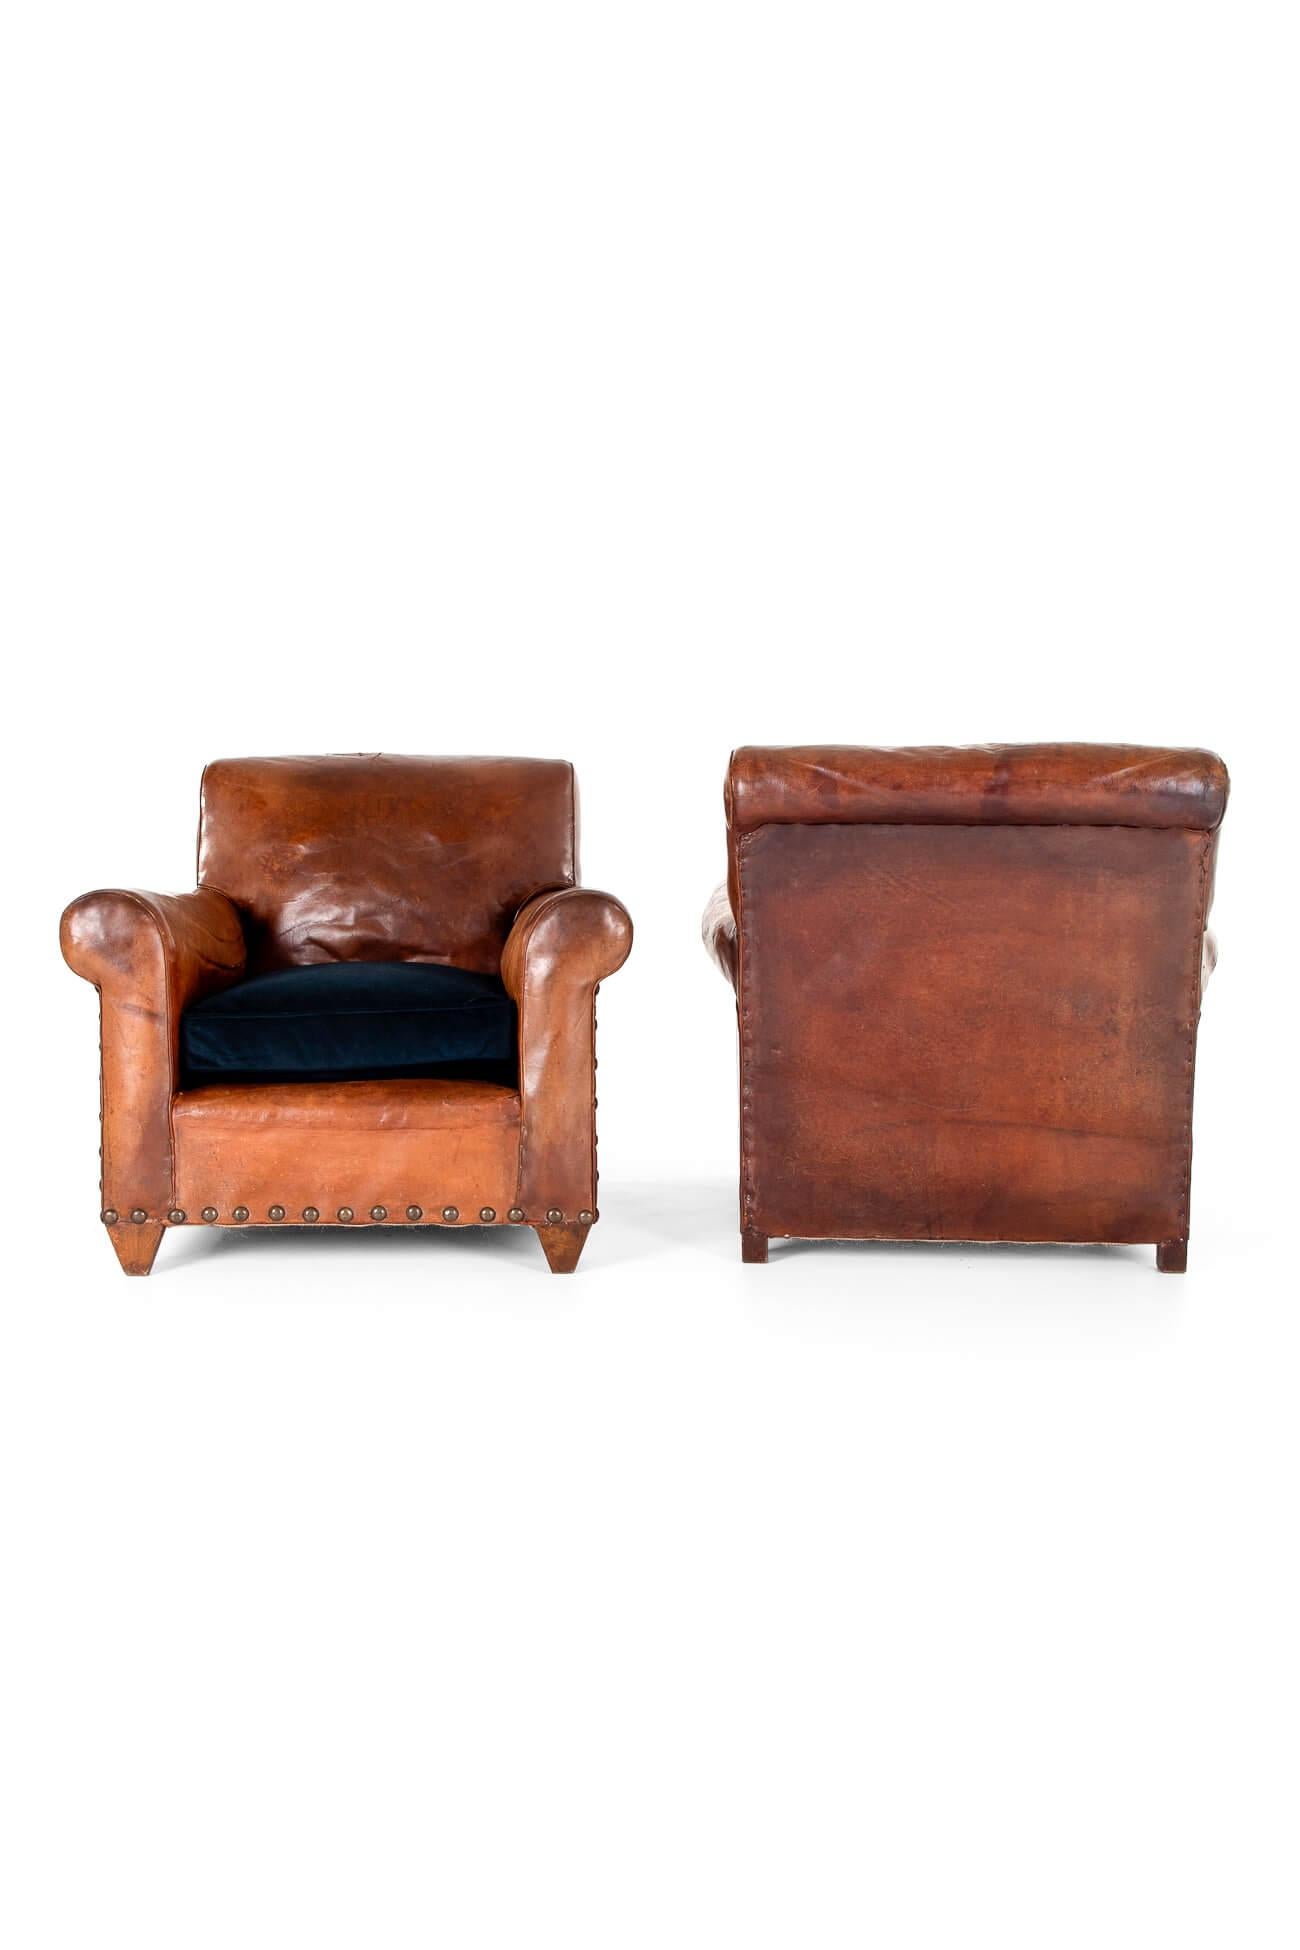 A wonderful pair of cognac leather club chairs with indigo-blue velvet seats.

Fully restored with new webbing and springs replaced where necessary. The original oak frames are strong and the arms are strengthened with new bolts. The original supple